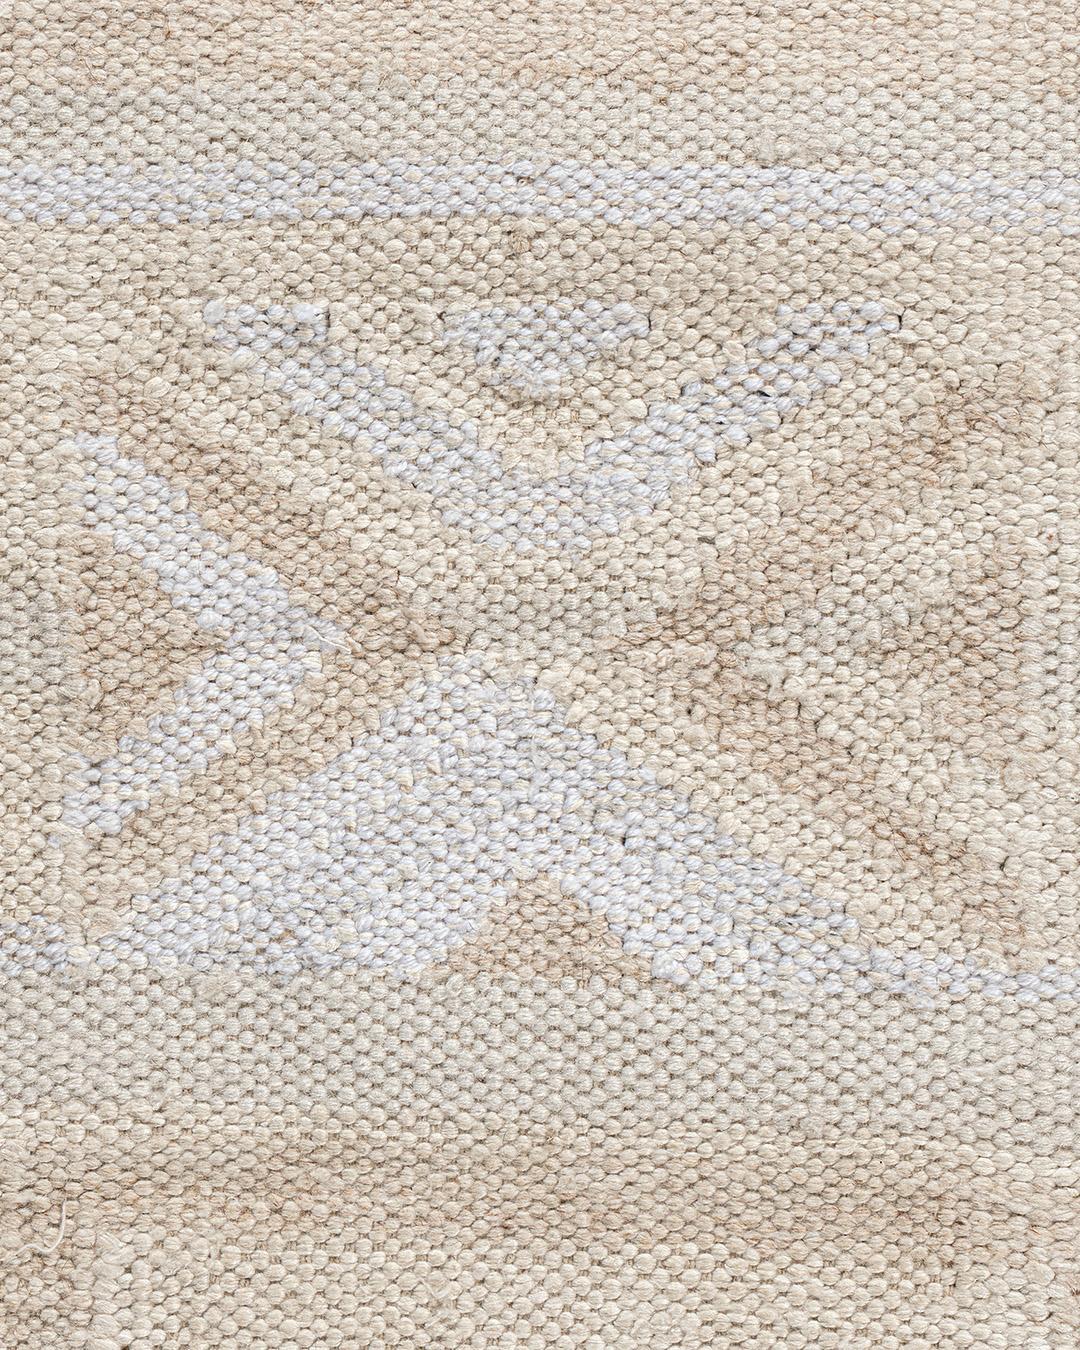 New Scandinavian Swedish Style Flatweave Collection Deco Rug 9'11 x 13'9 In New Condition For Sale In New York, NY